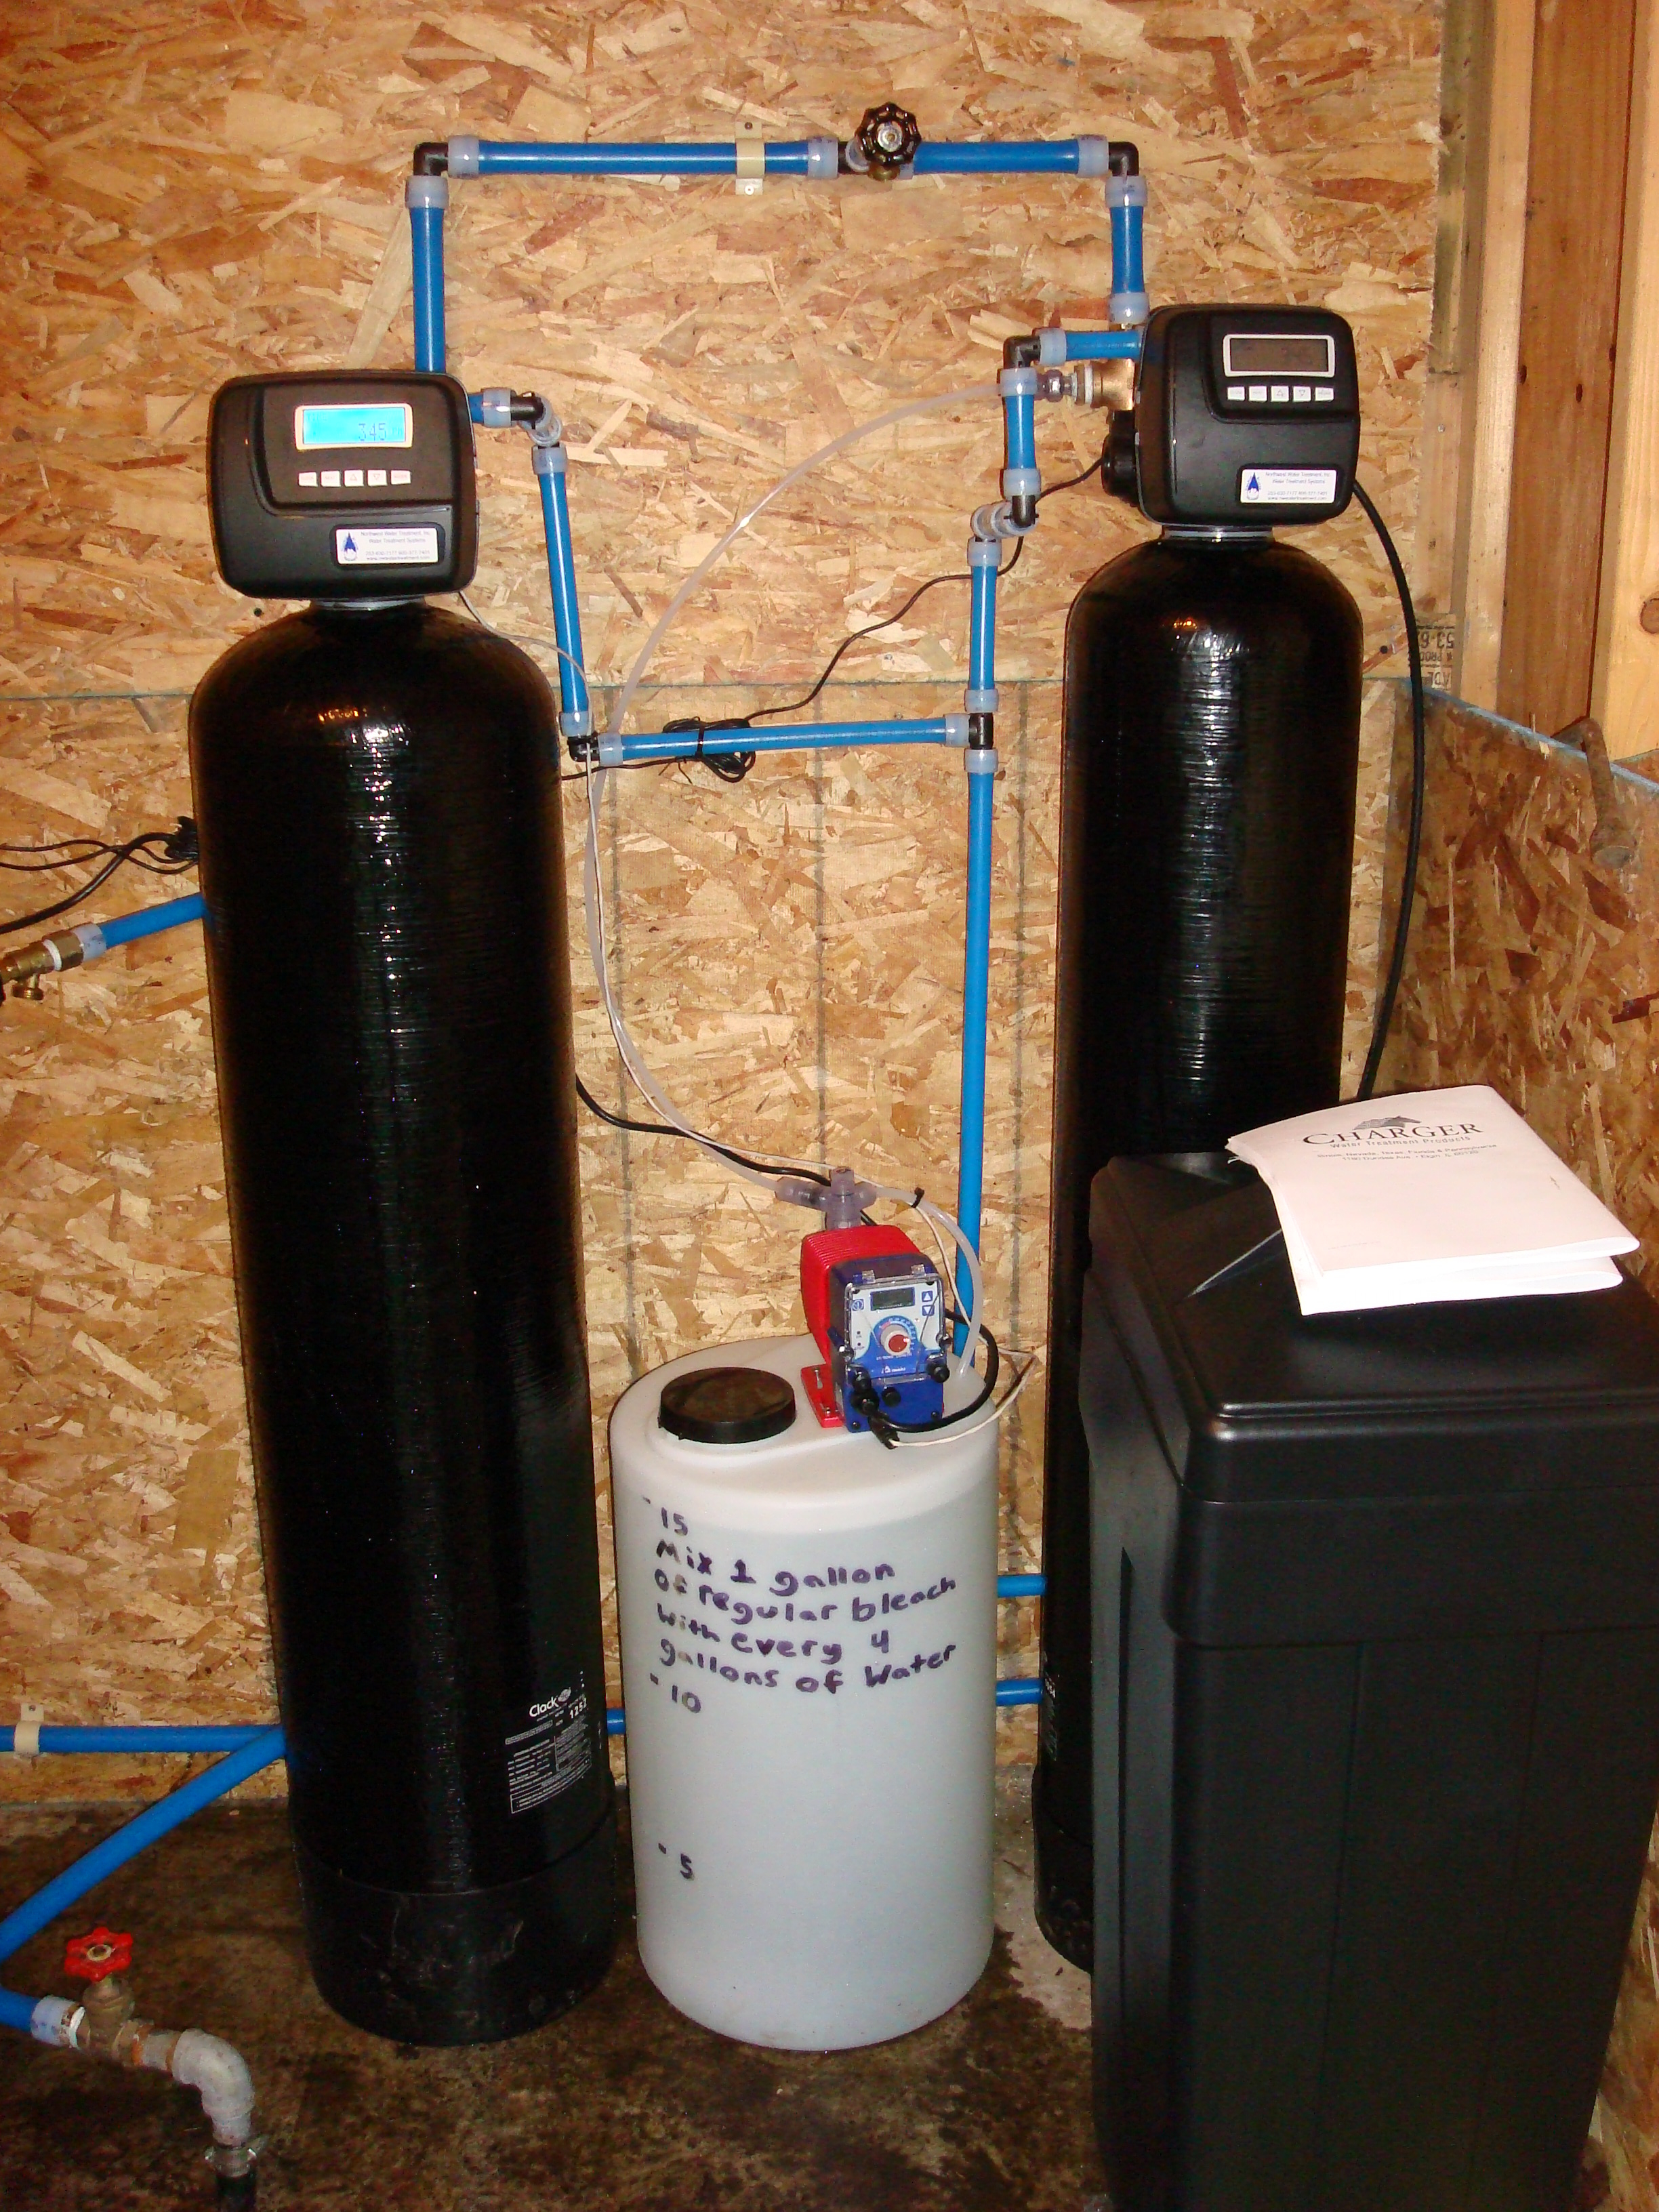 Enjoy quality water at home. Affordable, long-lasting water filtration and treatment systems you can easily maintain.